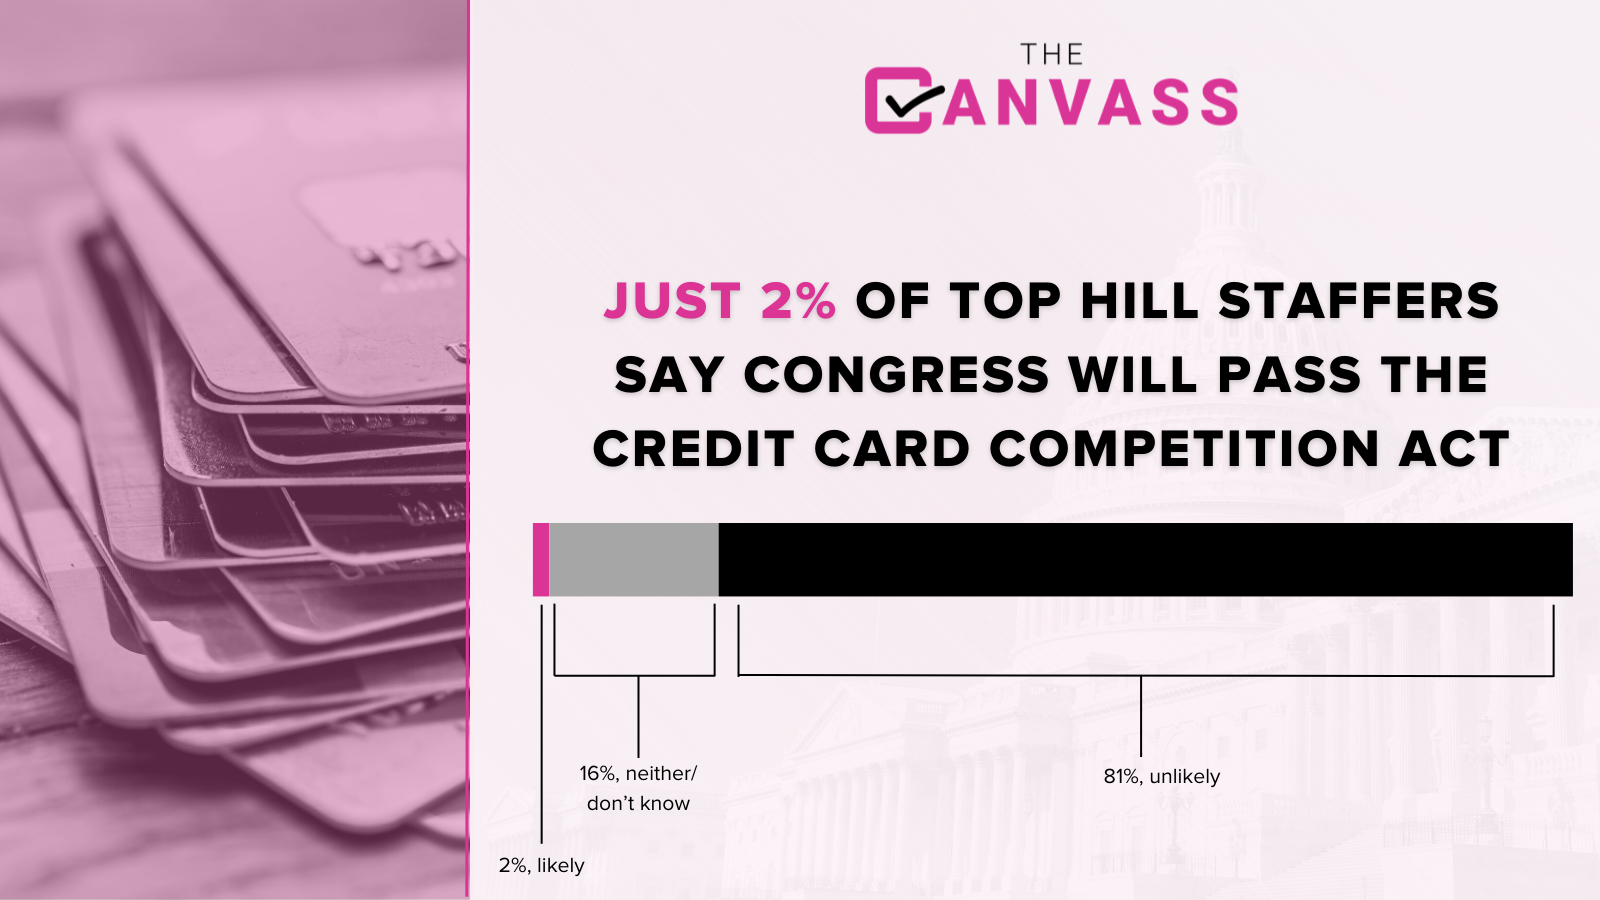 2% of senior Capitol Hill aides believe Congress will pass the Credit Card Competition Act